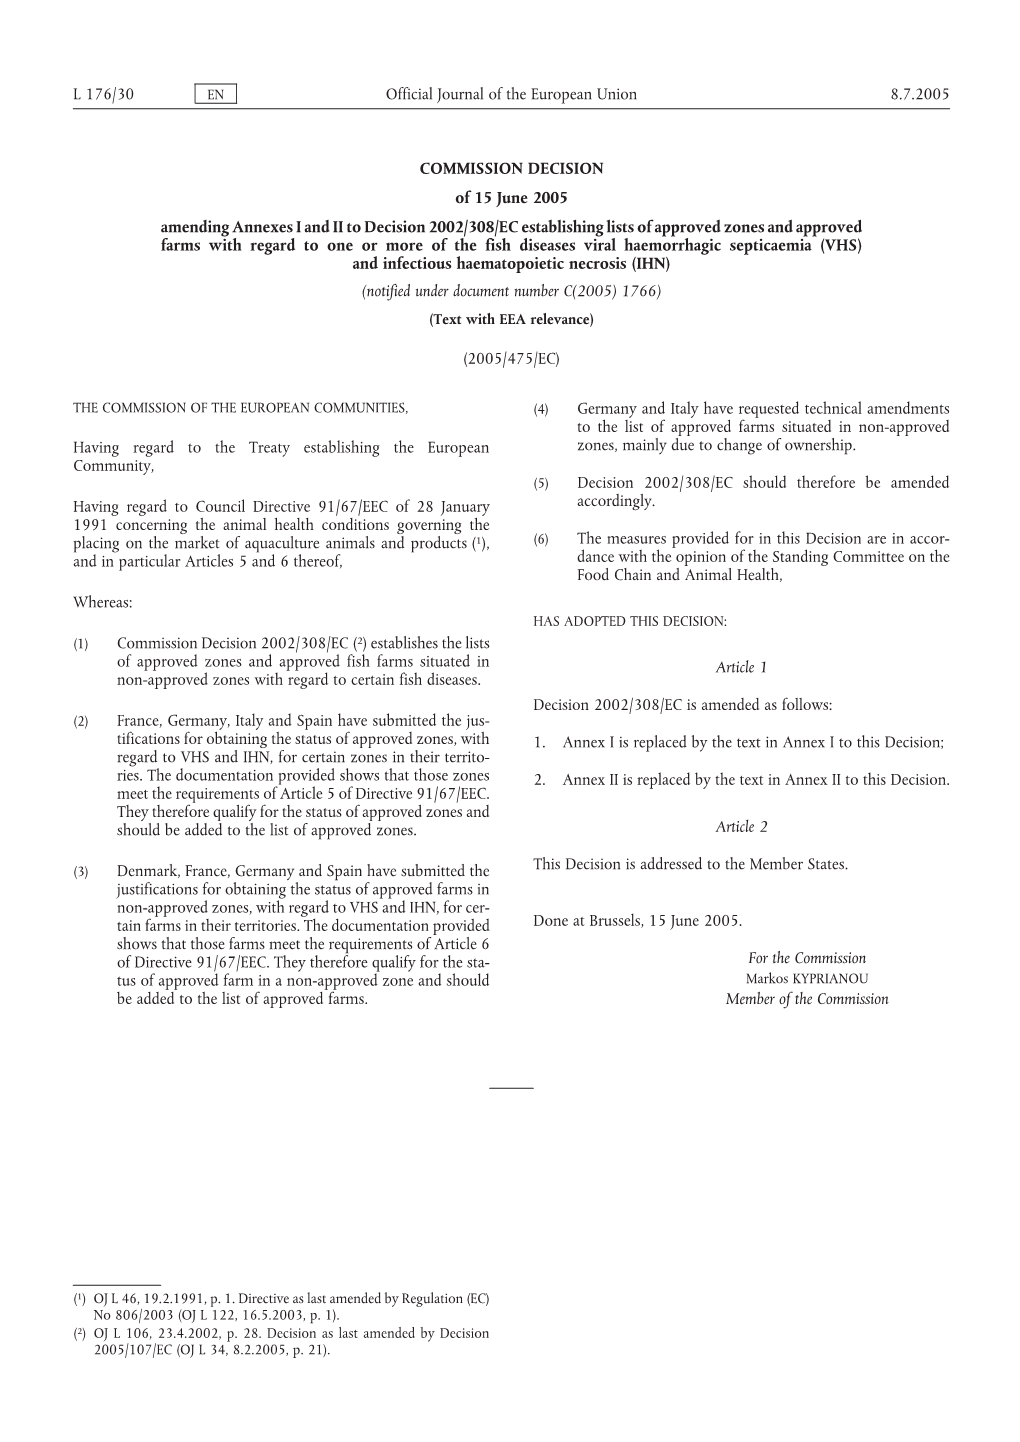 COMMISSION DECISION of 15 June 2005 Amending Annexes I and II To